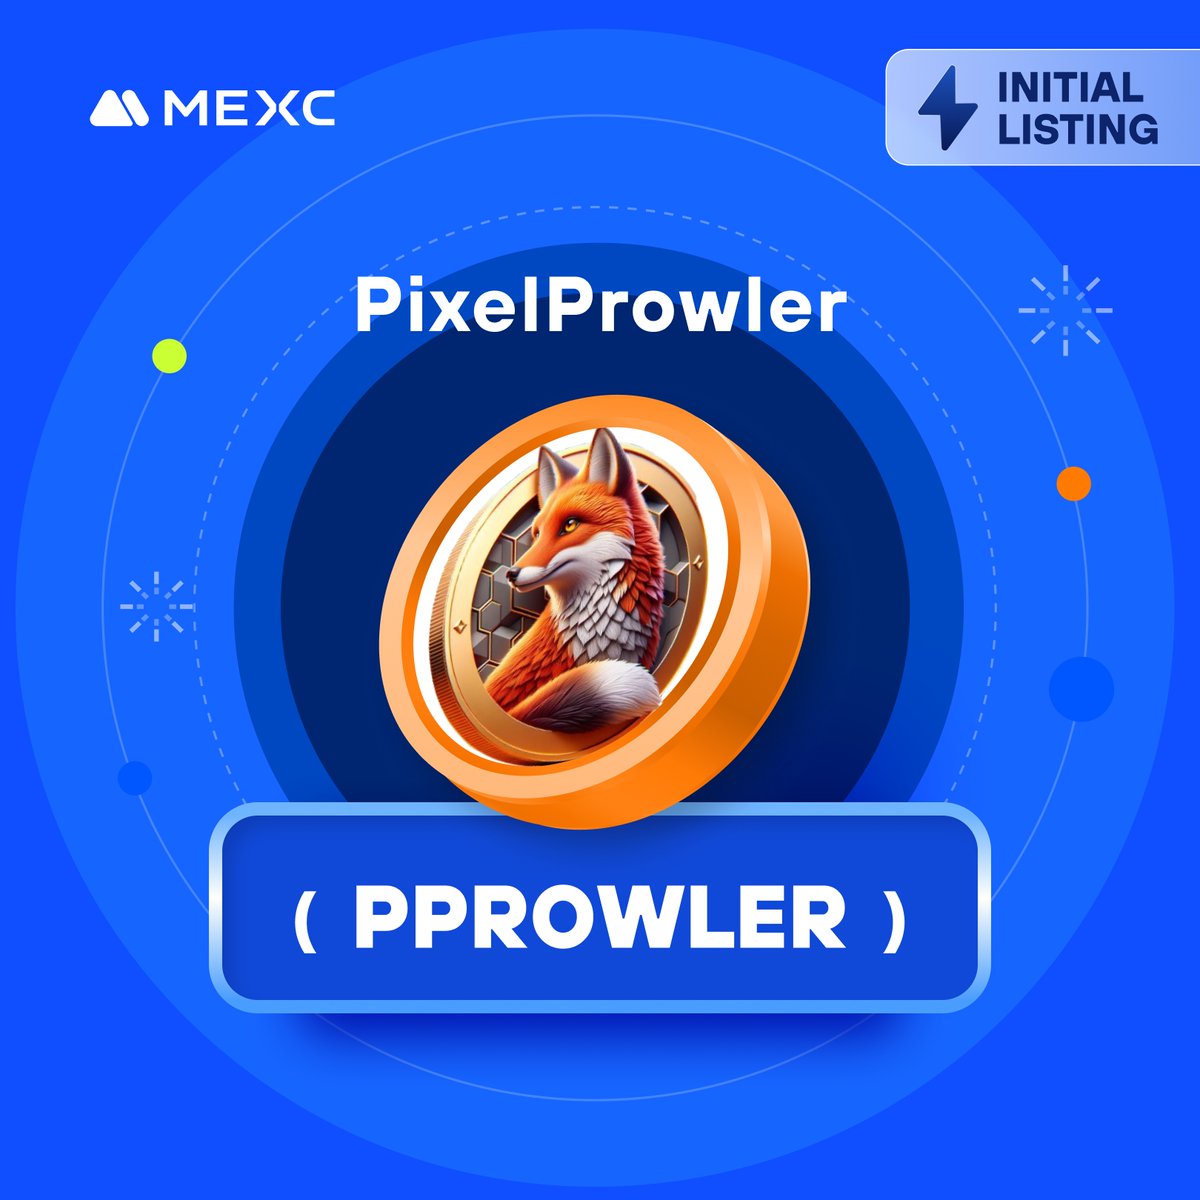 We're thrilled to announce that the @PixelProwlerCYP Kickstarter has concluded and #PPROWLER will be listed on #MEXC! 🔹Deposit: Opened 🔹PPROWLER/USDT Trading in Innovation Zone: 2024-04-29 07:00 (UTC) Details: mexc.com/support/articl…